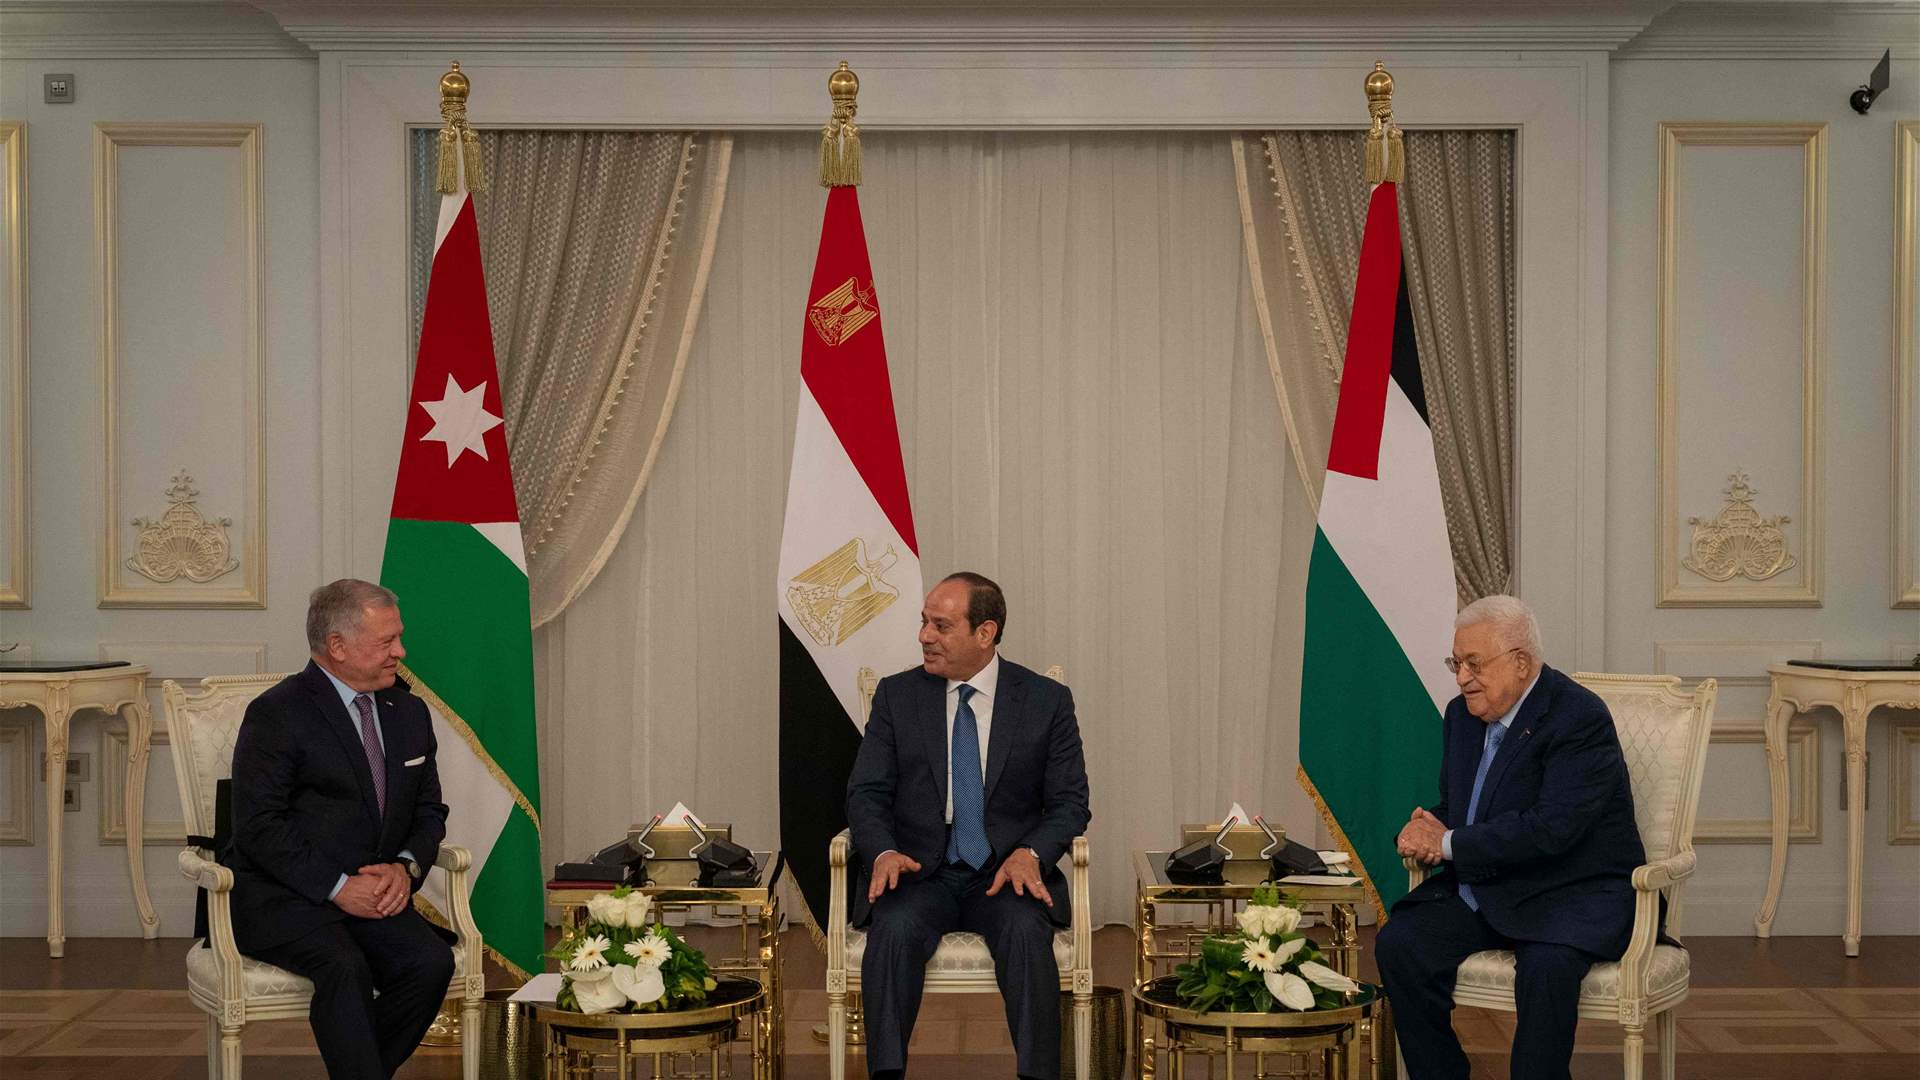 Leaders of Egypt, Jordan, and Palestinian Authority meet to discuss situation in Gaza